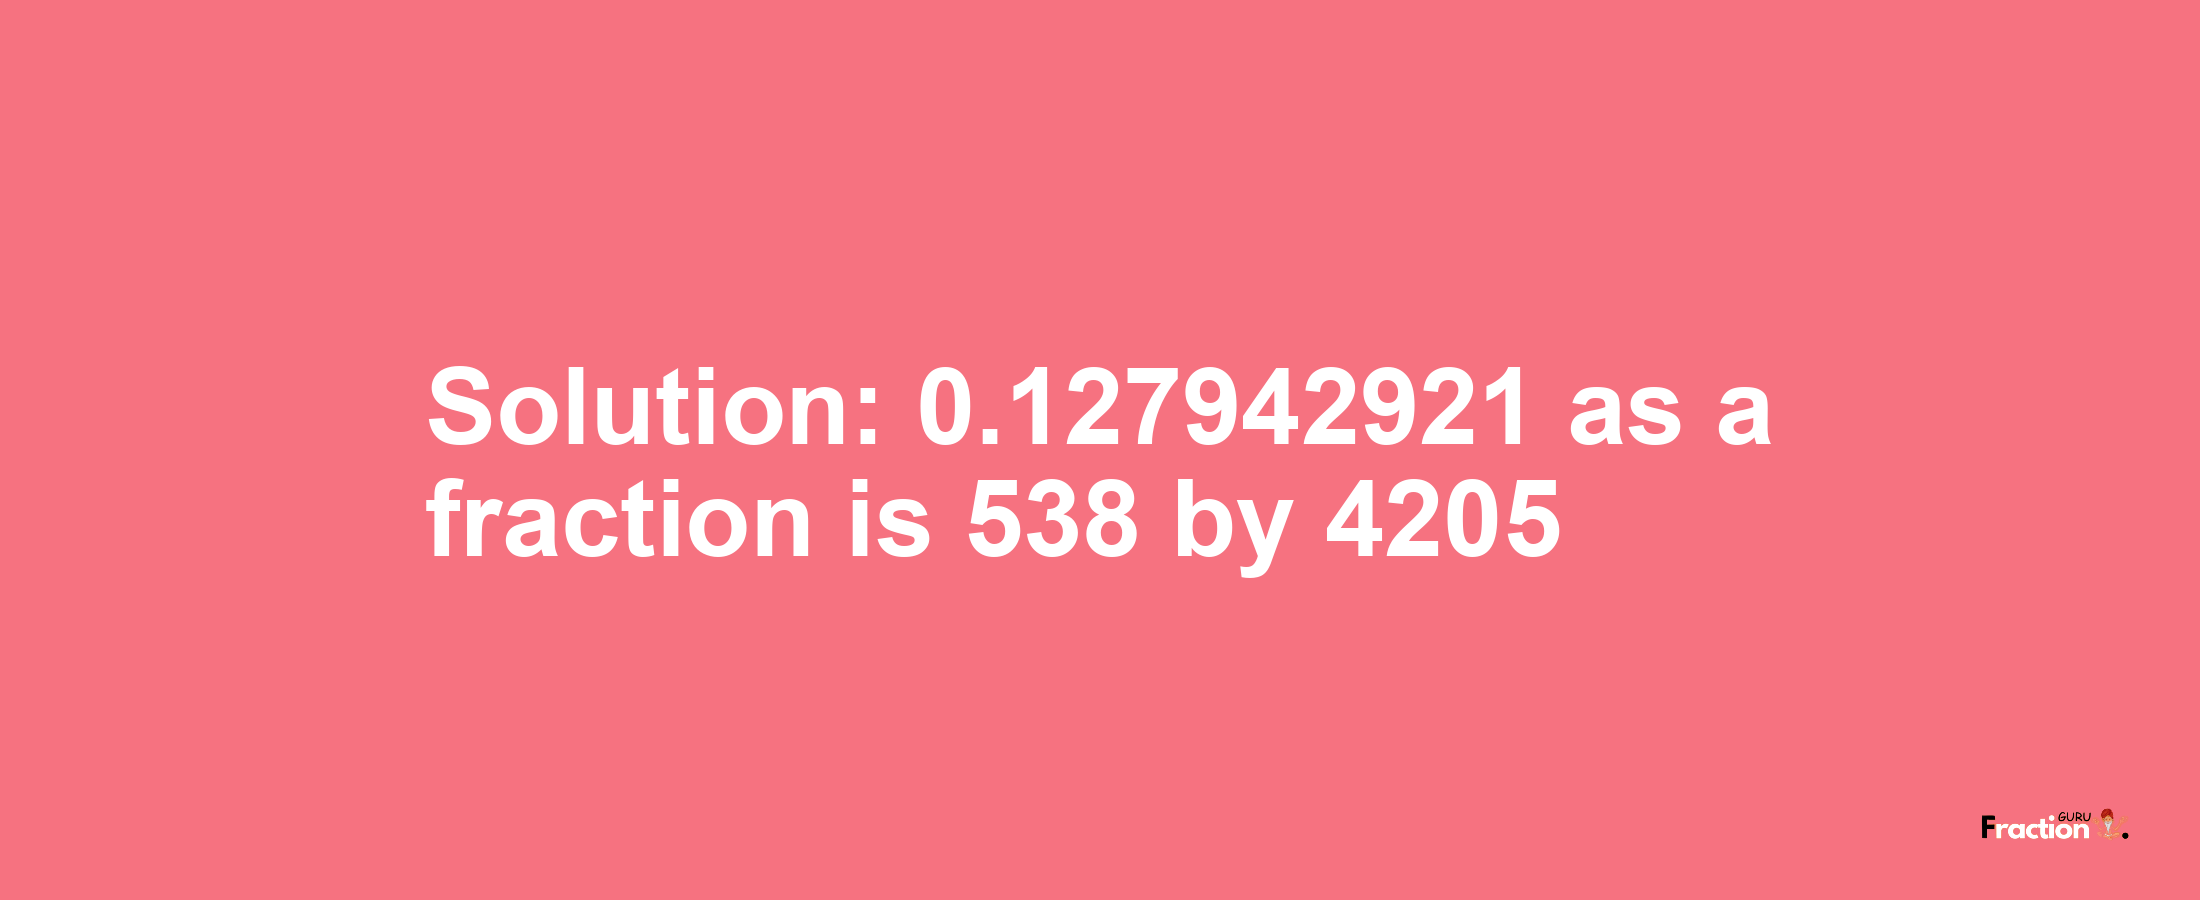 Solution:0.127942921 as a fraction is 538/4205